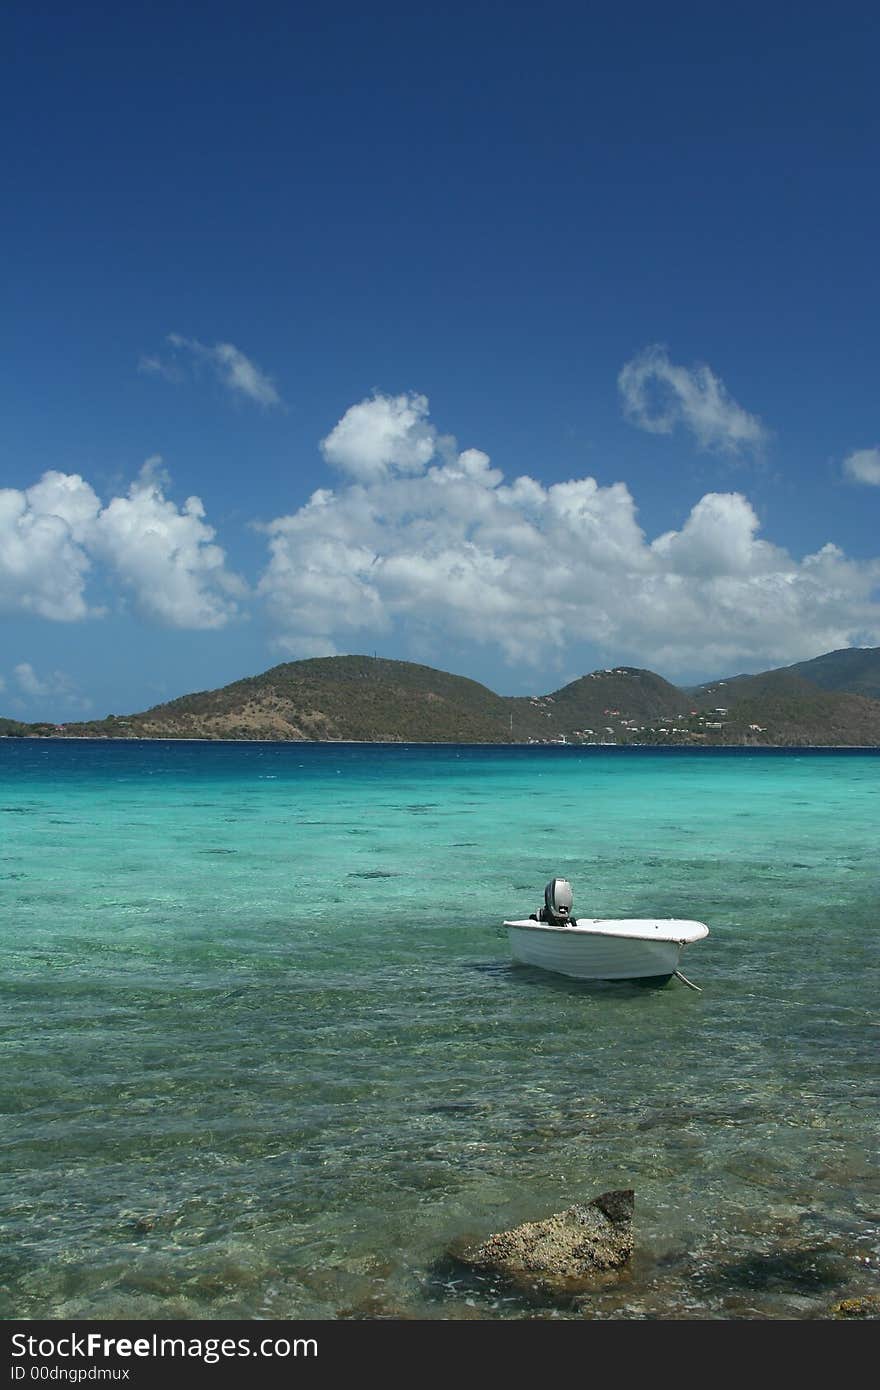 This lonesome boat bobs gently on the quiet waves at Leinster Bay in St. John, USVI.